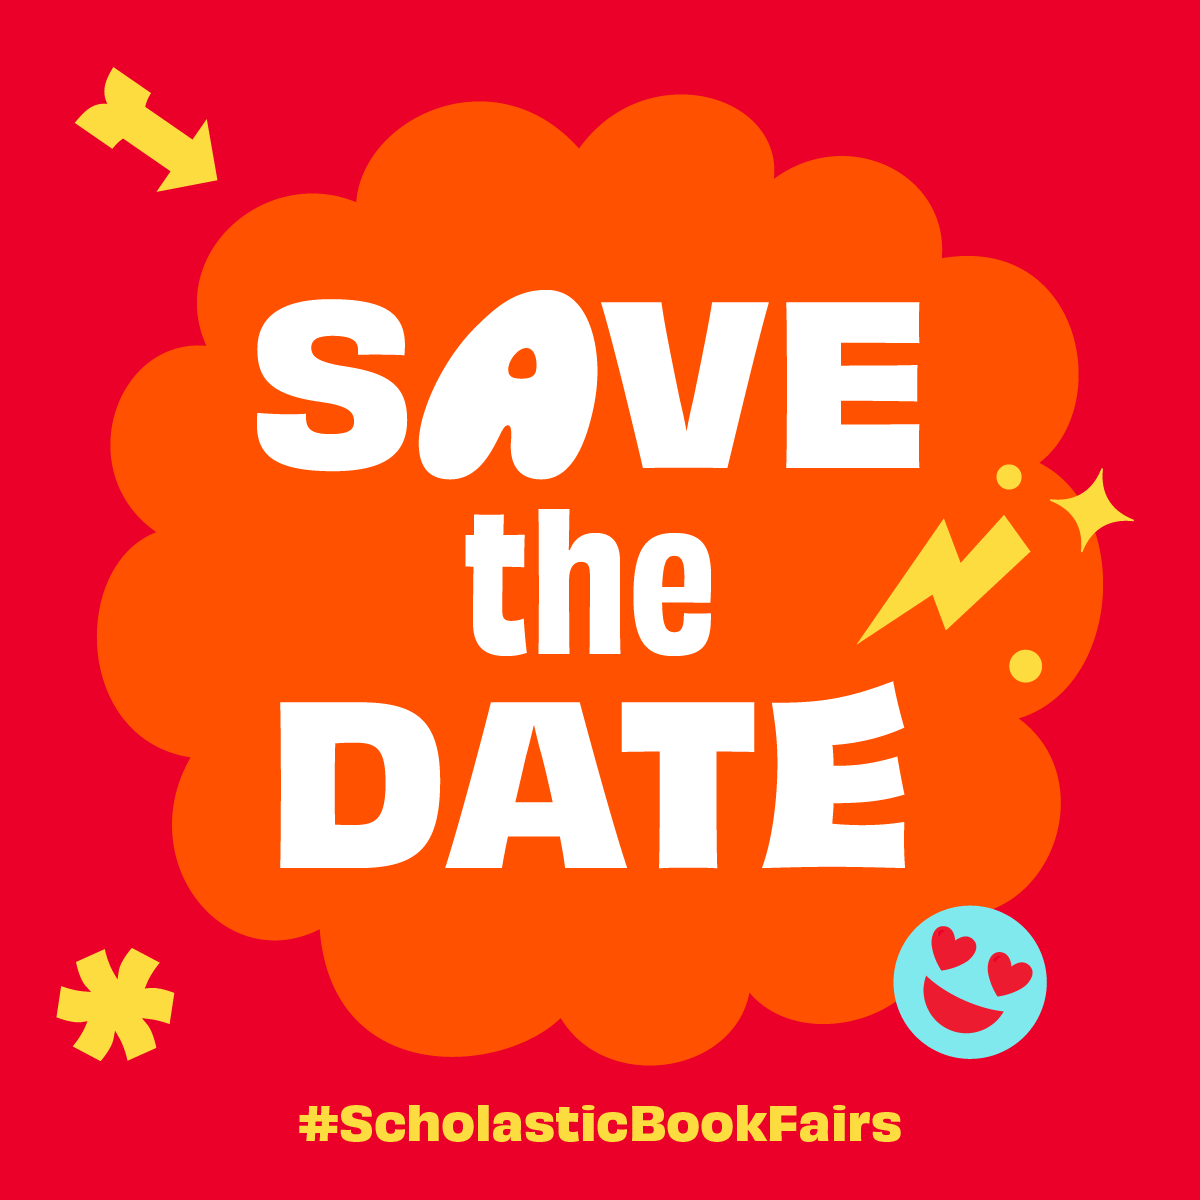 The Scholastic Book Fair is coming! SAVE THE DATE for Tuesday, May 28th - Friday, May 31st and get ready to empower your reader. The book fair will be open during school hours for student shopping. On Thursday, May 30th the book fair will be open from 4 - 8 PM for family shopping. Look for more information coming home in the next few weeks. Check out our Book Fair homepage to explore books and sign up for an e-wallet at https://bookfairs.scholastic.com/bf/ottawaelementaryschool2